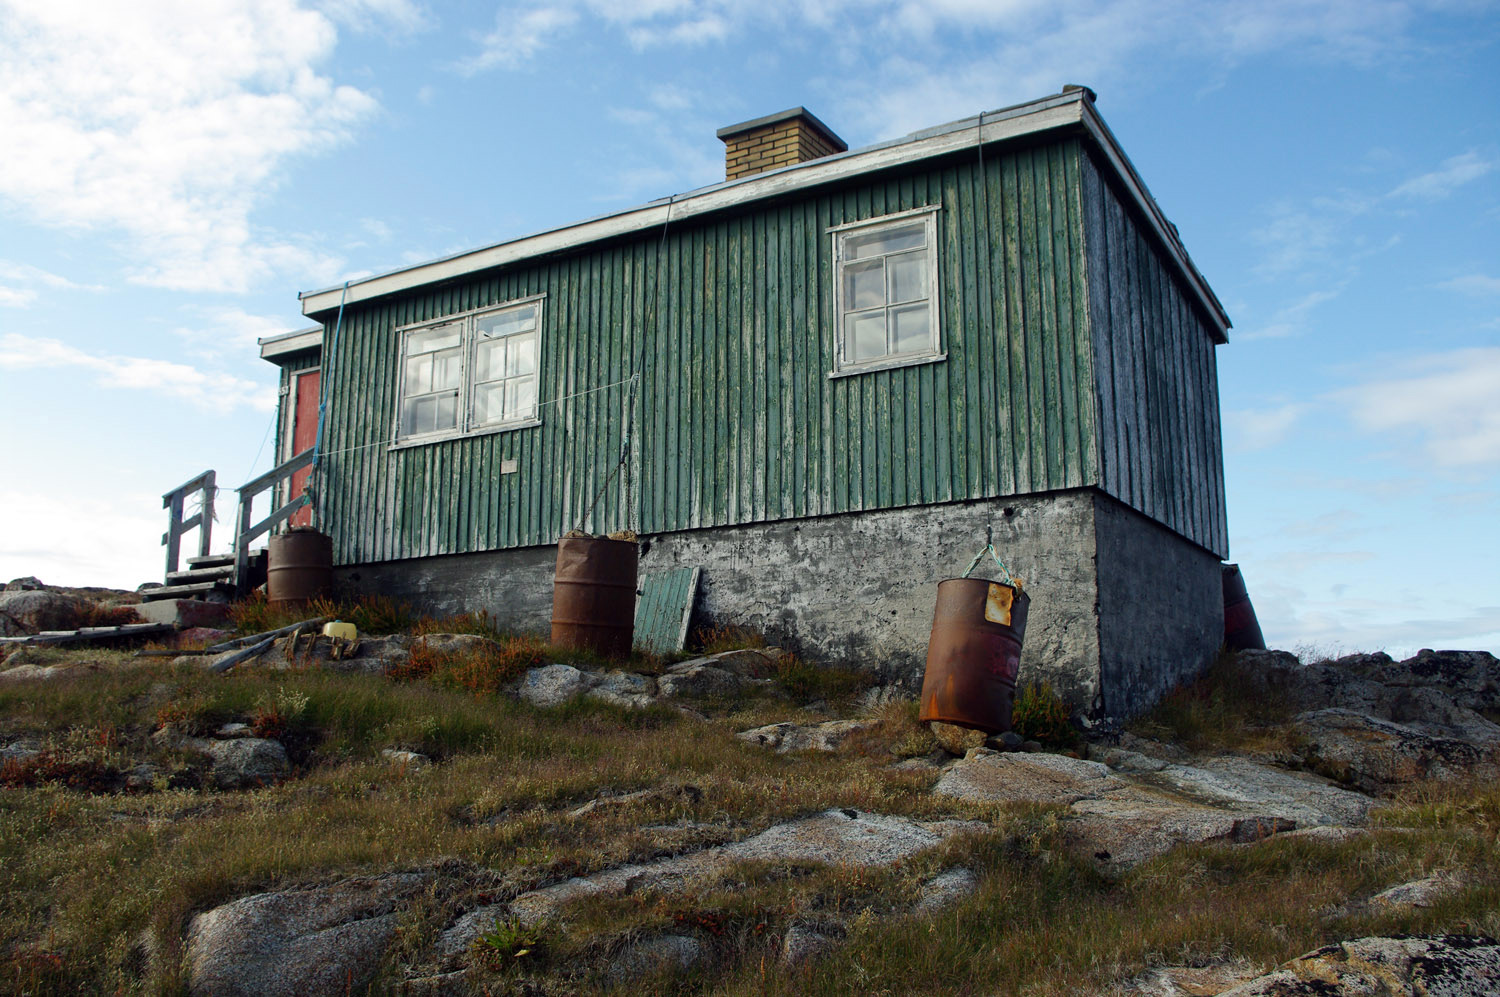 Ikateq - House - East Greenland<br />, greenland, travel